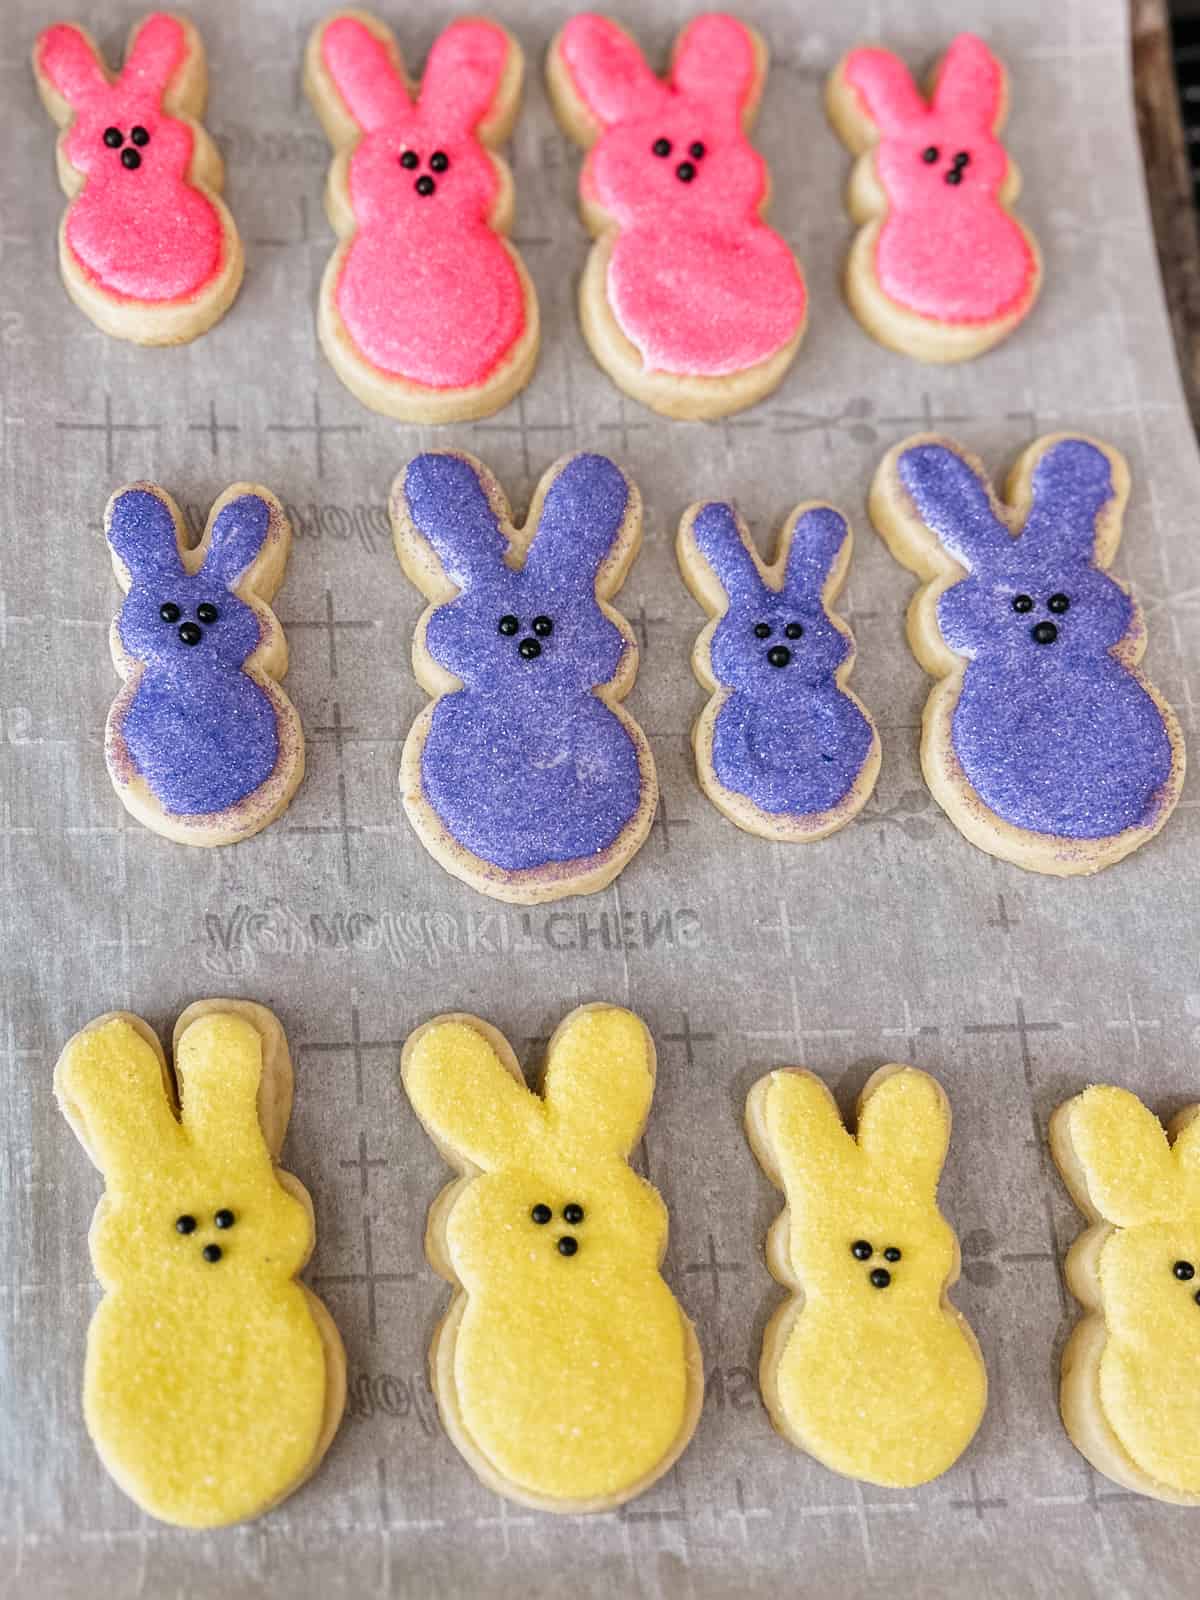 Bunny Peeps Sugar cookies with bright colored frosting and sprinkles